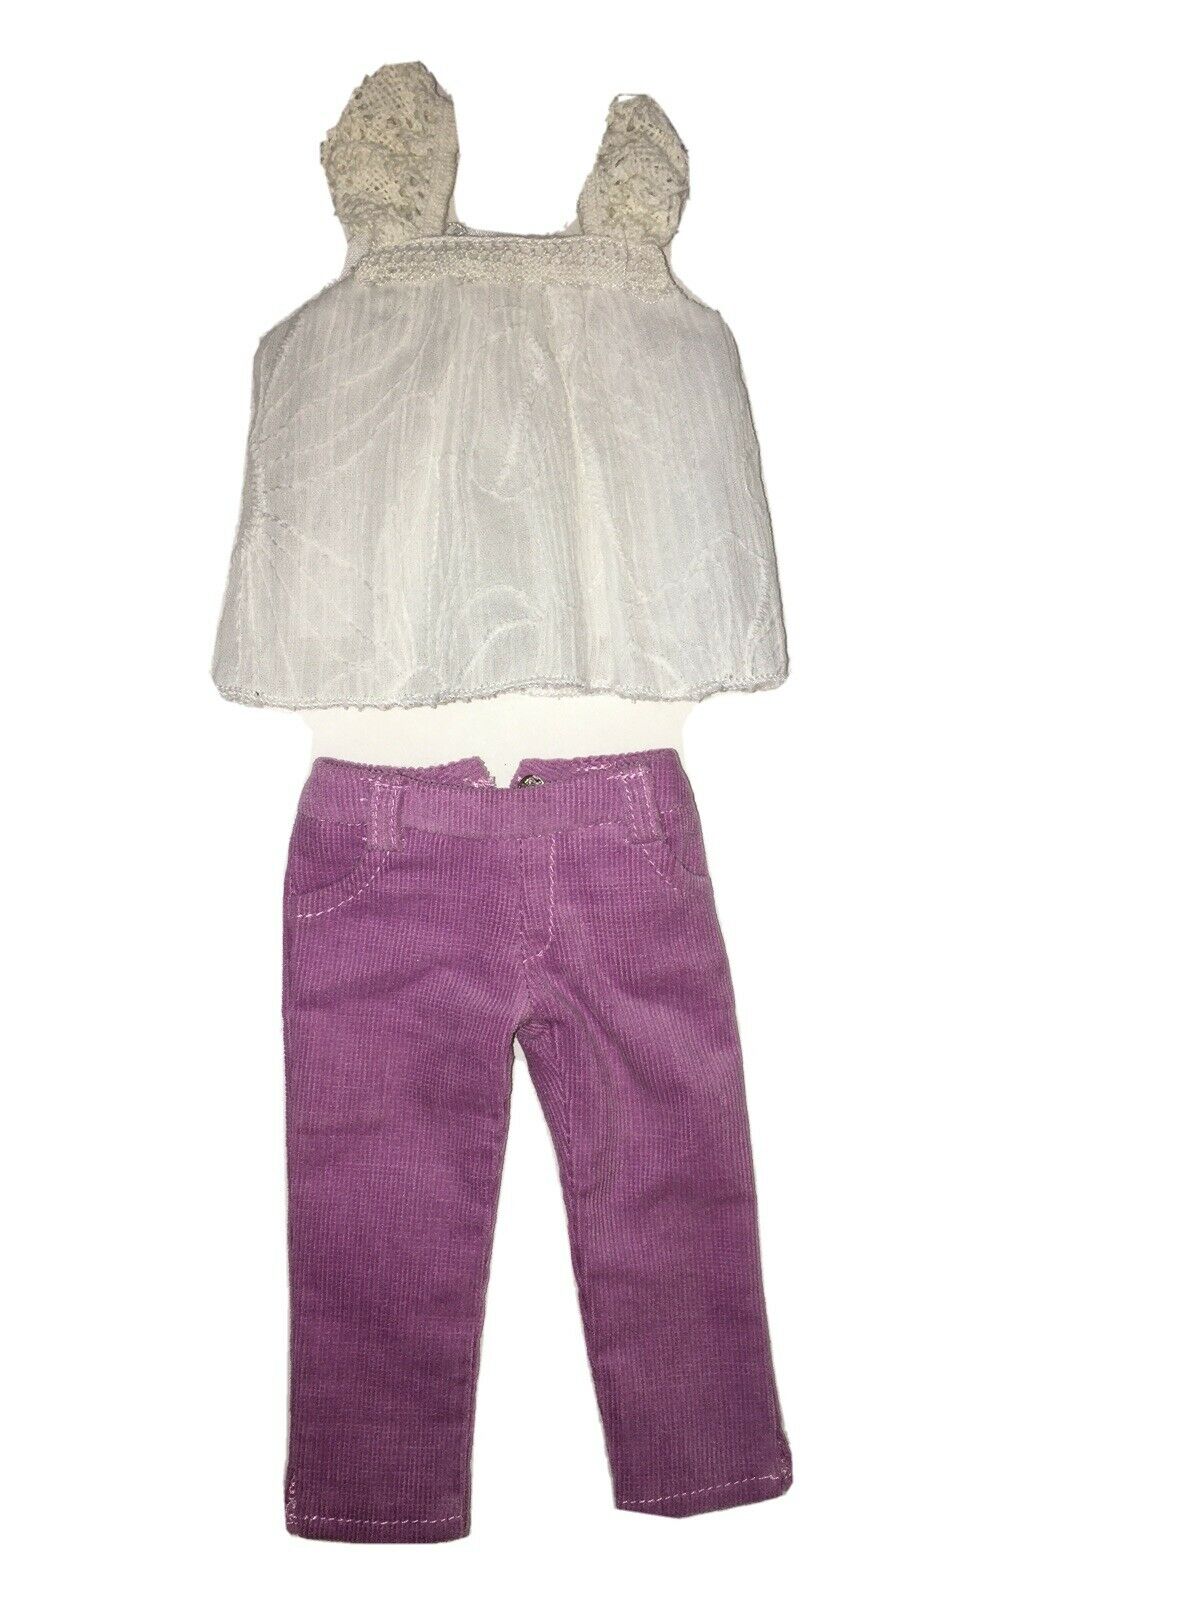 ~empire Clothing Top & Capris Outfit Only~fits 16" Tonner Tyler Fashion Dolls